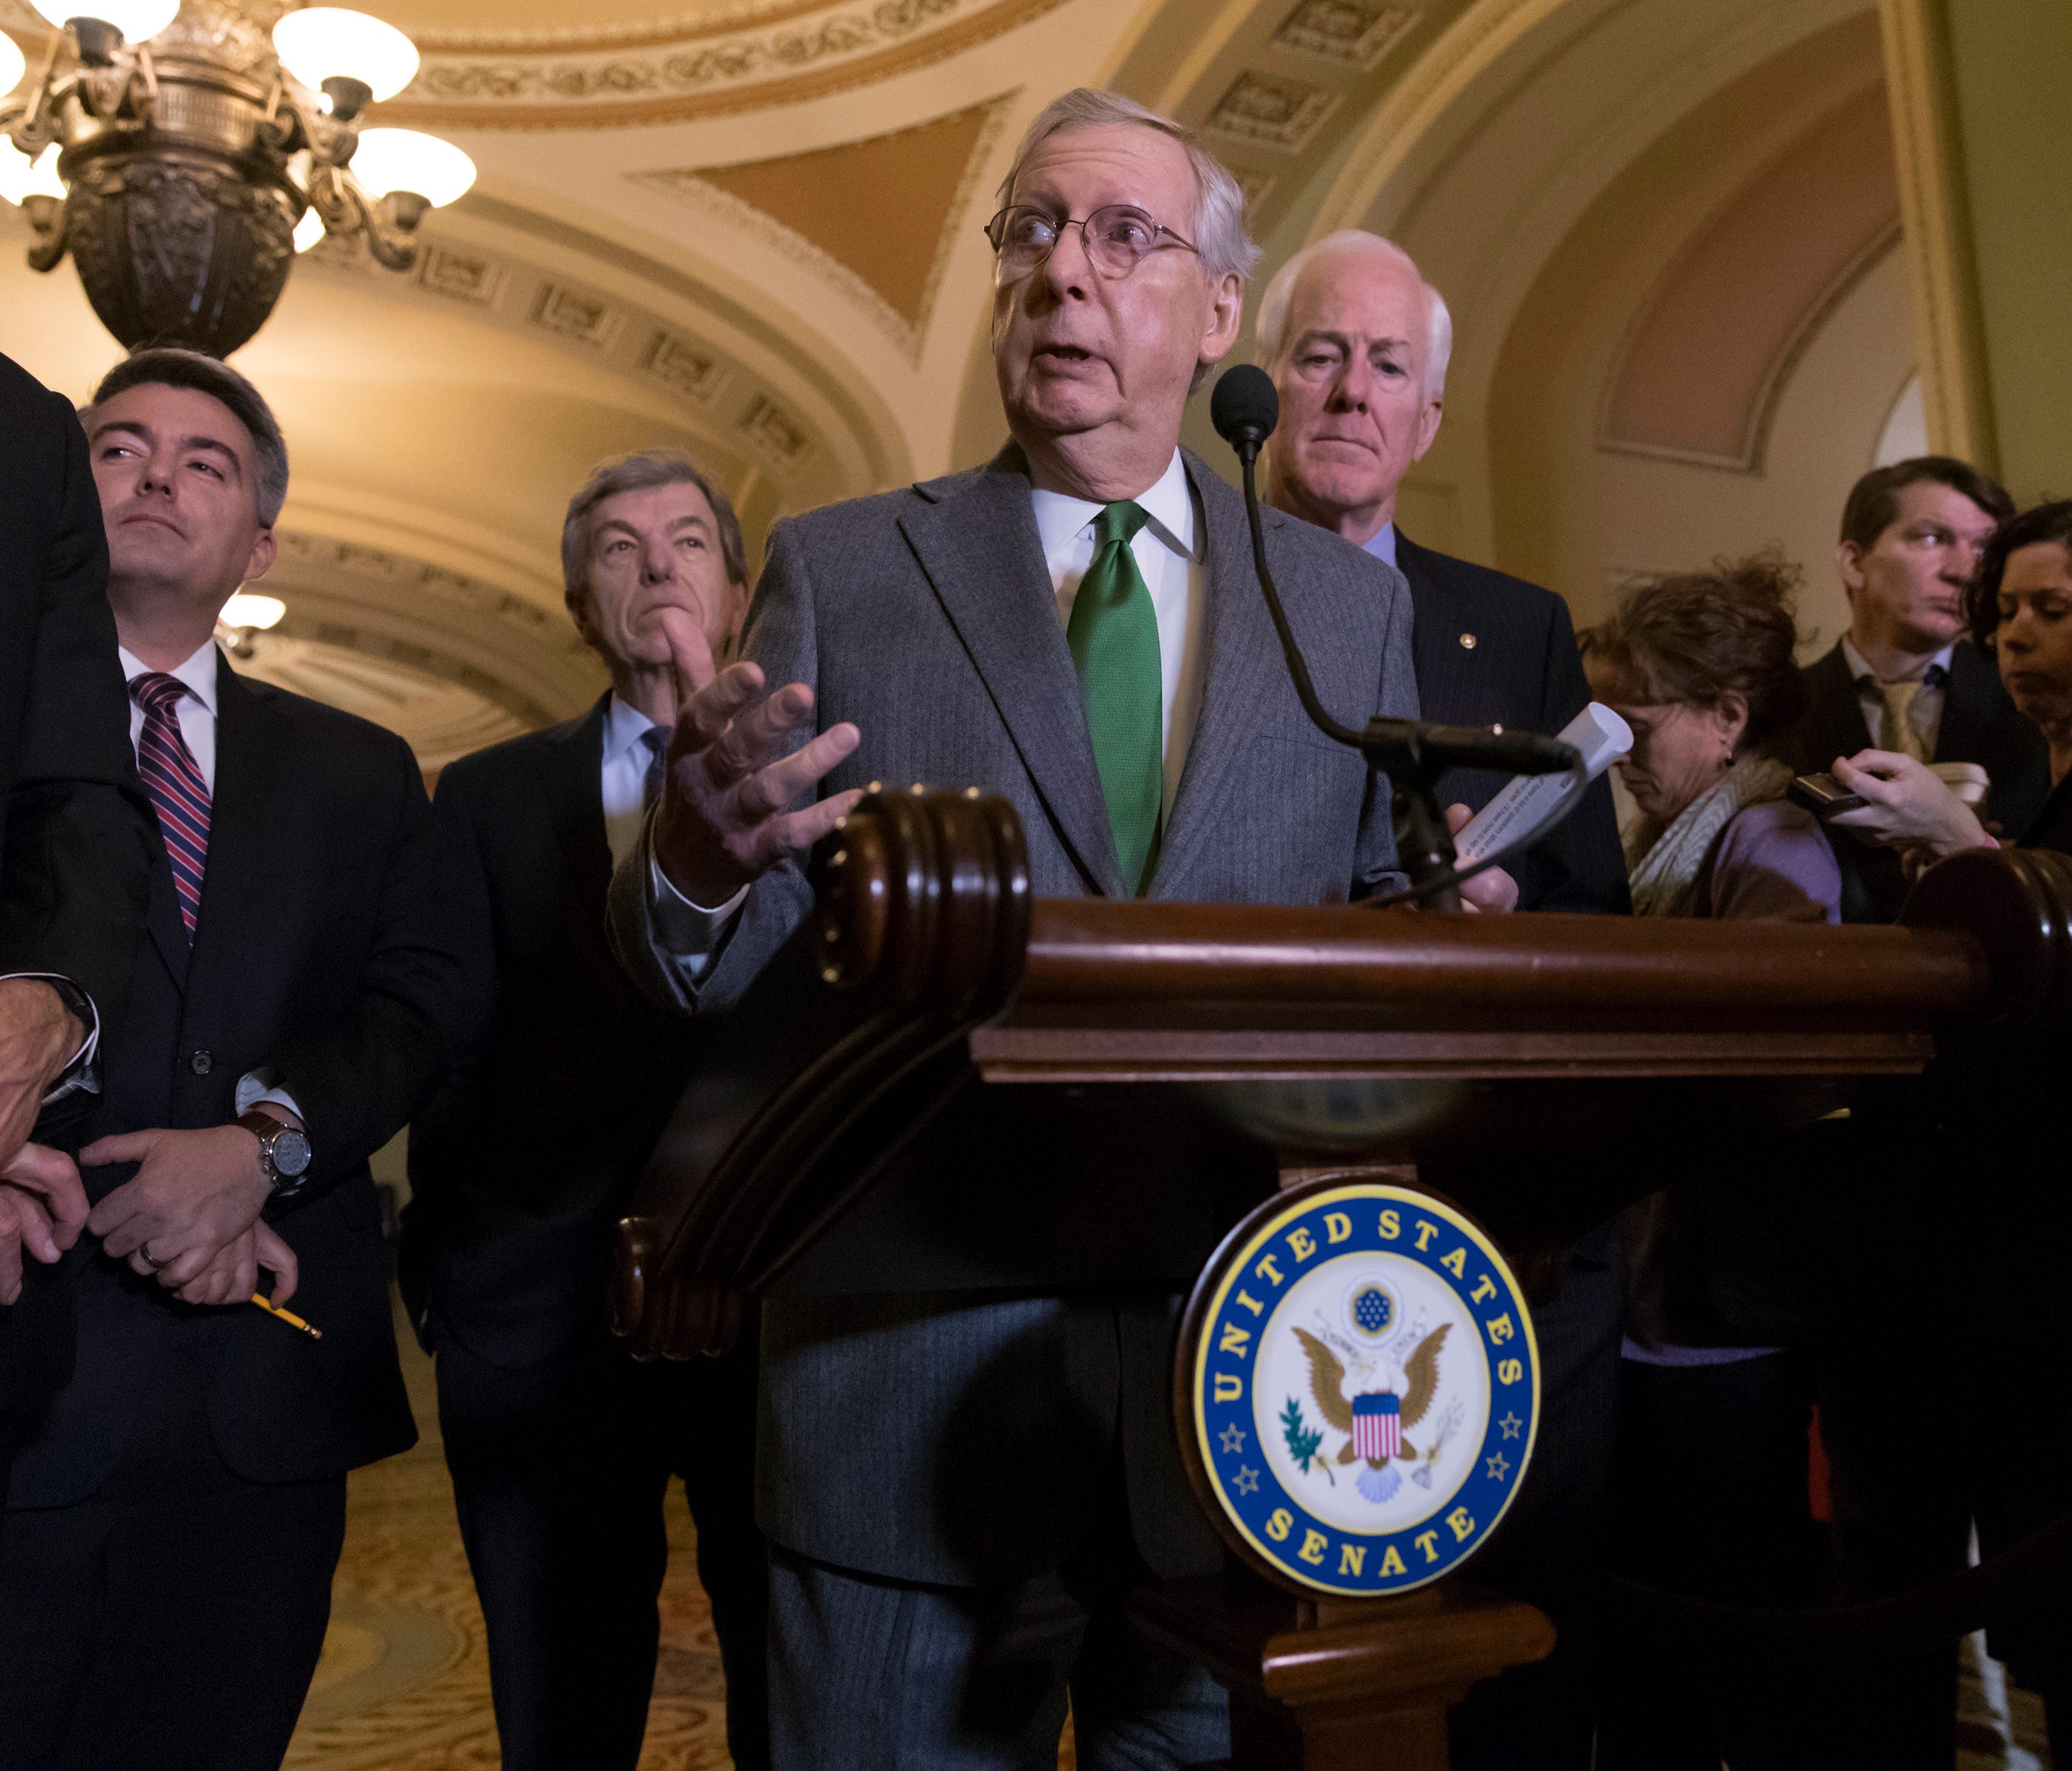 Senate Majority Leader Mitch McConnell, R-Ky., center, joined by other Republicans, speaks to reporters about the GOP tax bill following a closed-door strategy session on Capitol Hill in Washington, Tuesday, Dec. 12, 2017.